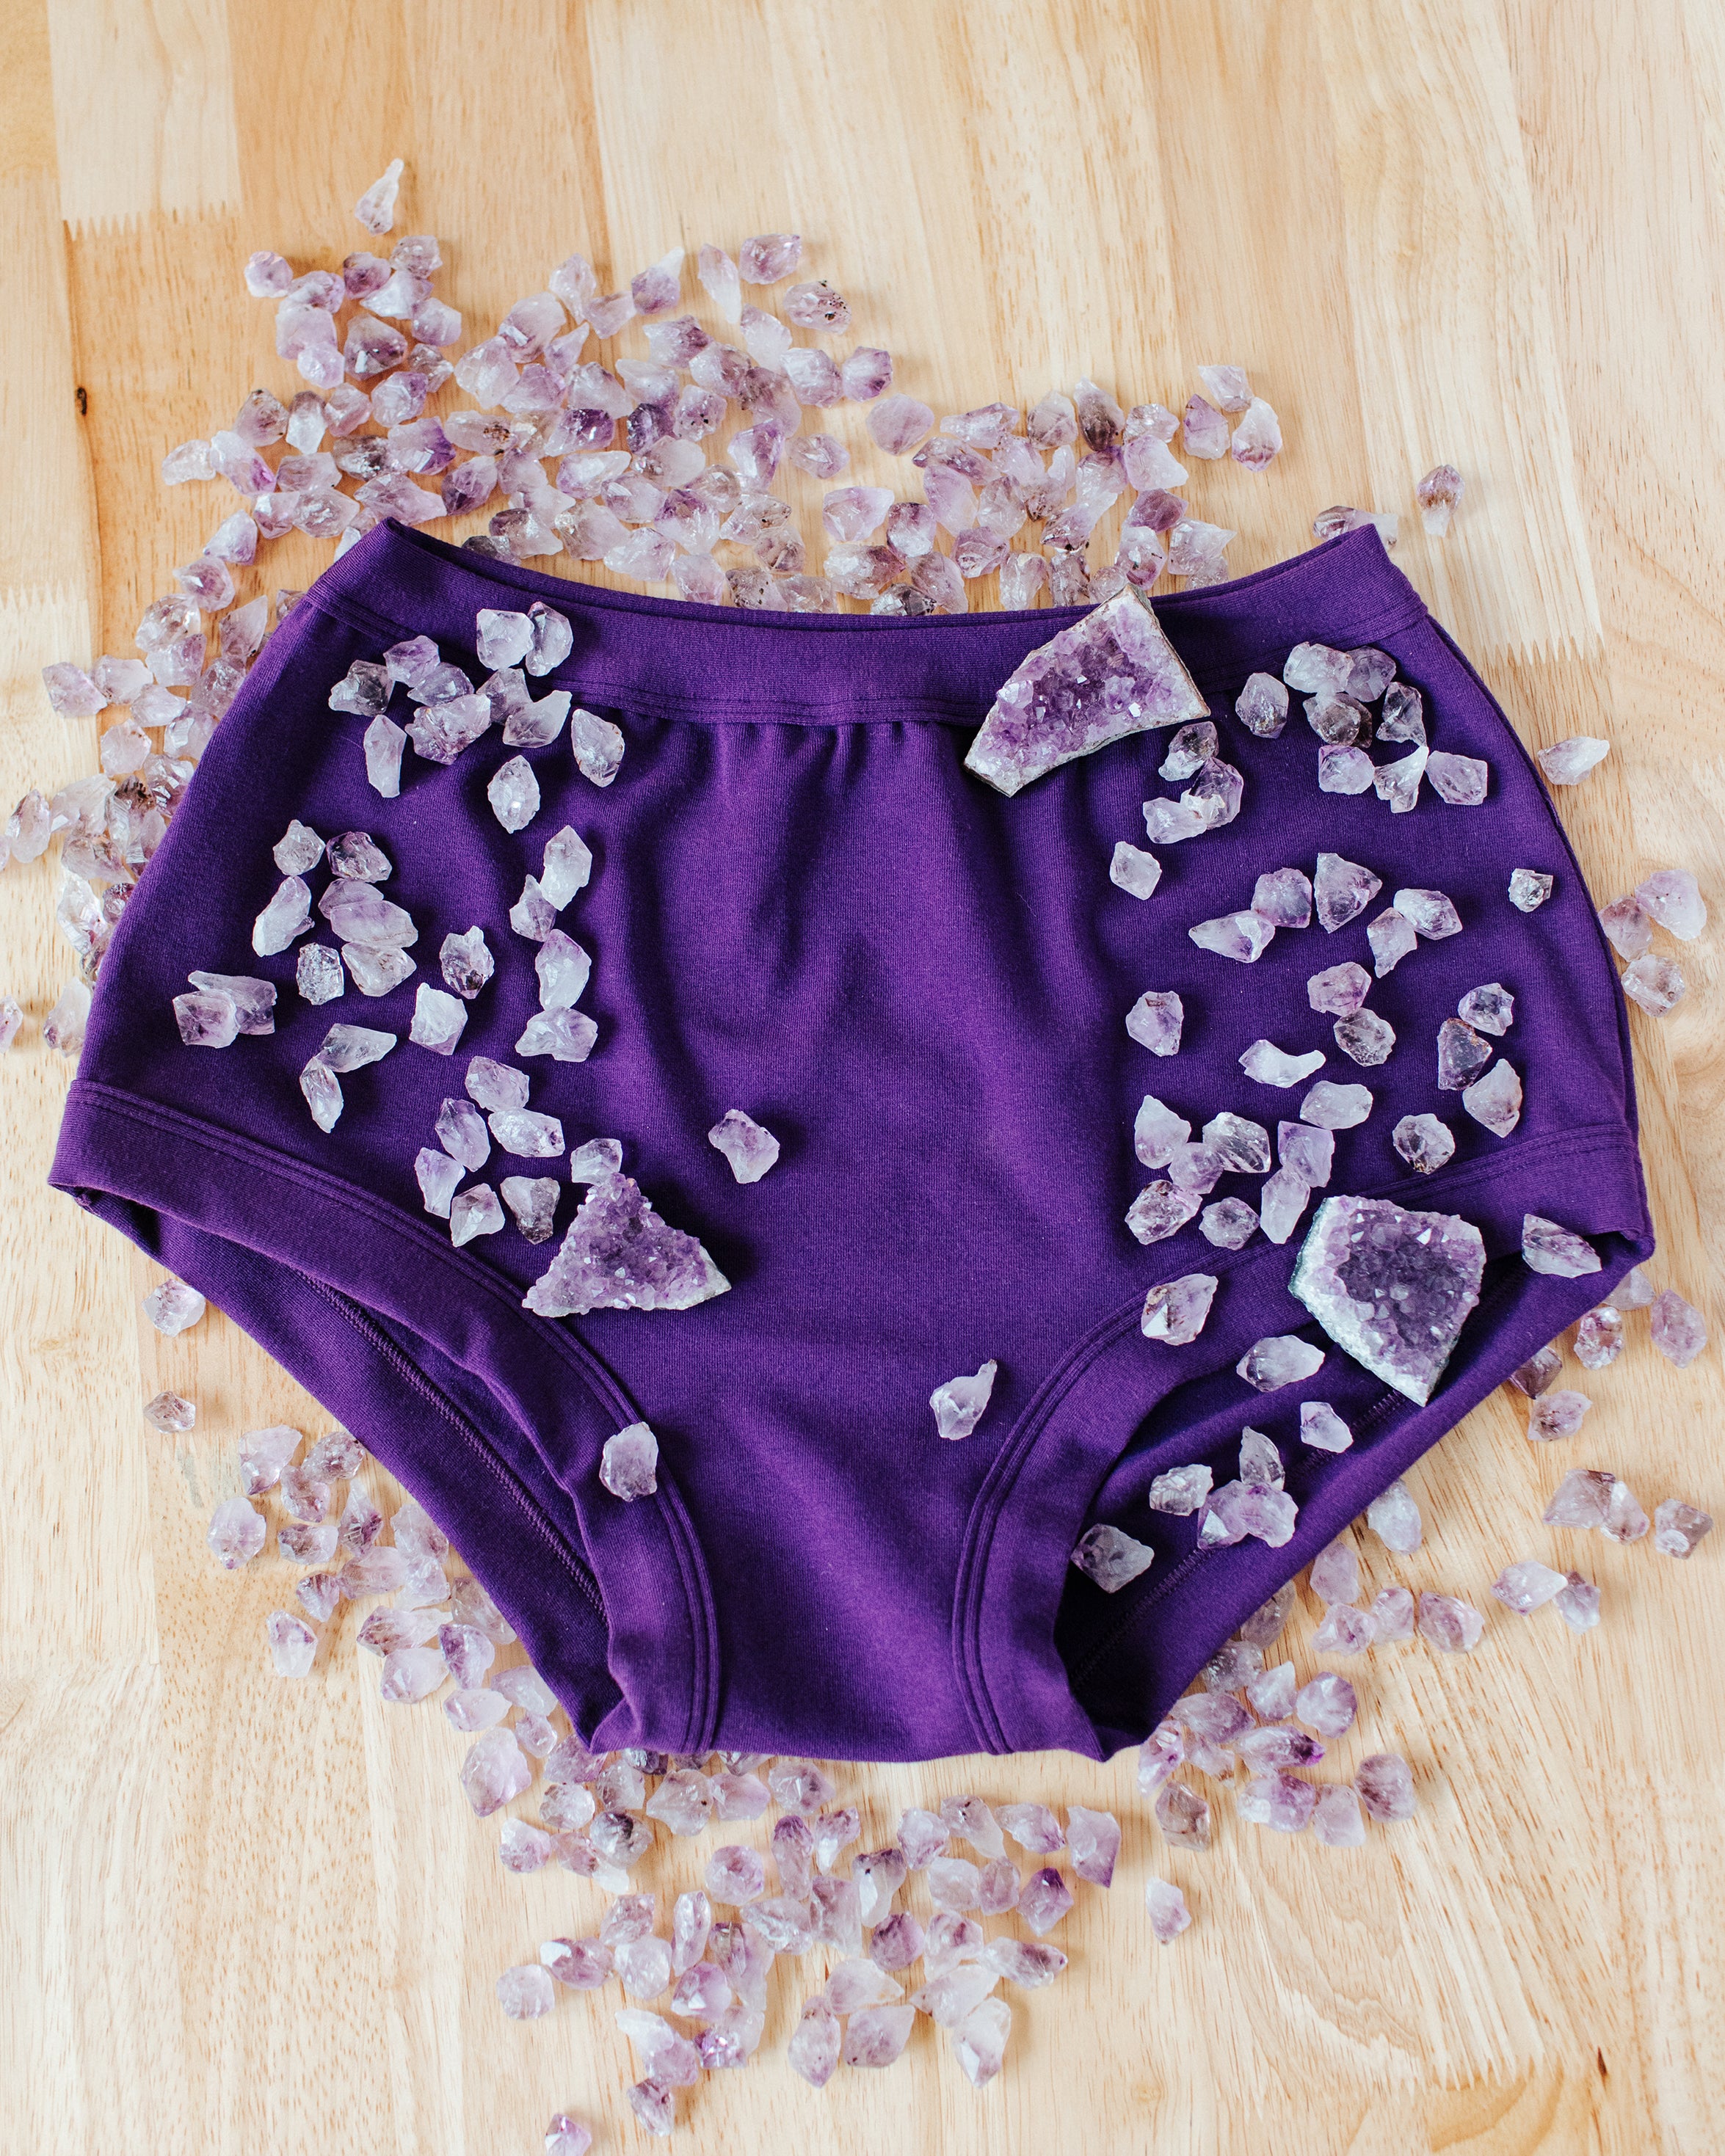 Flat lay of purple Deep Amethyst Original style underwear with large and small amethysts stones on and surrounding it.